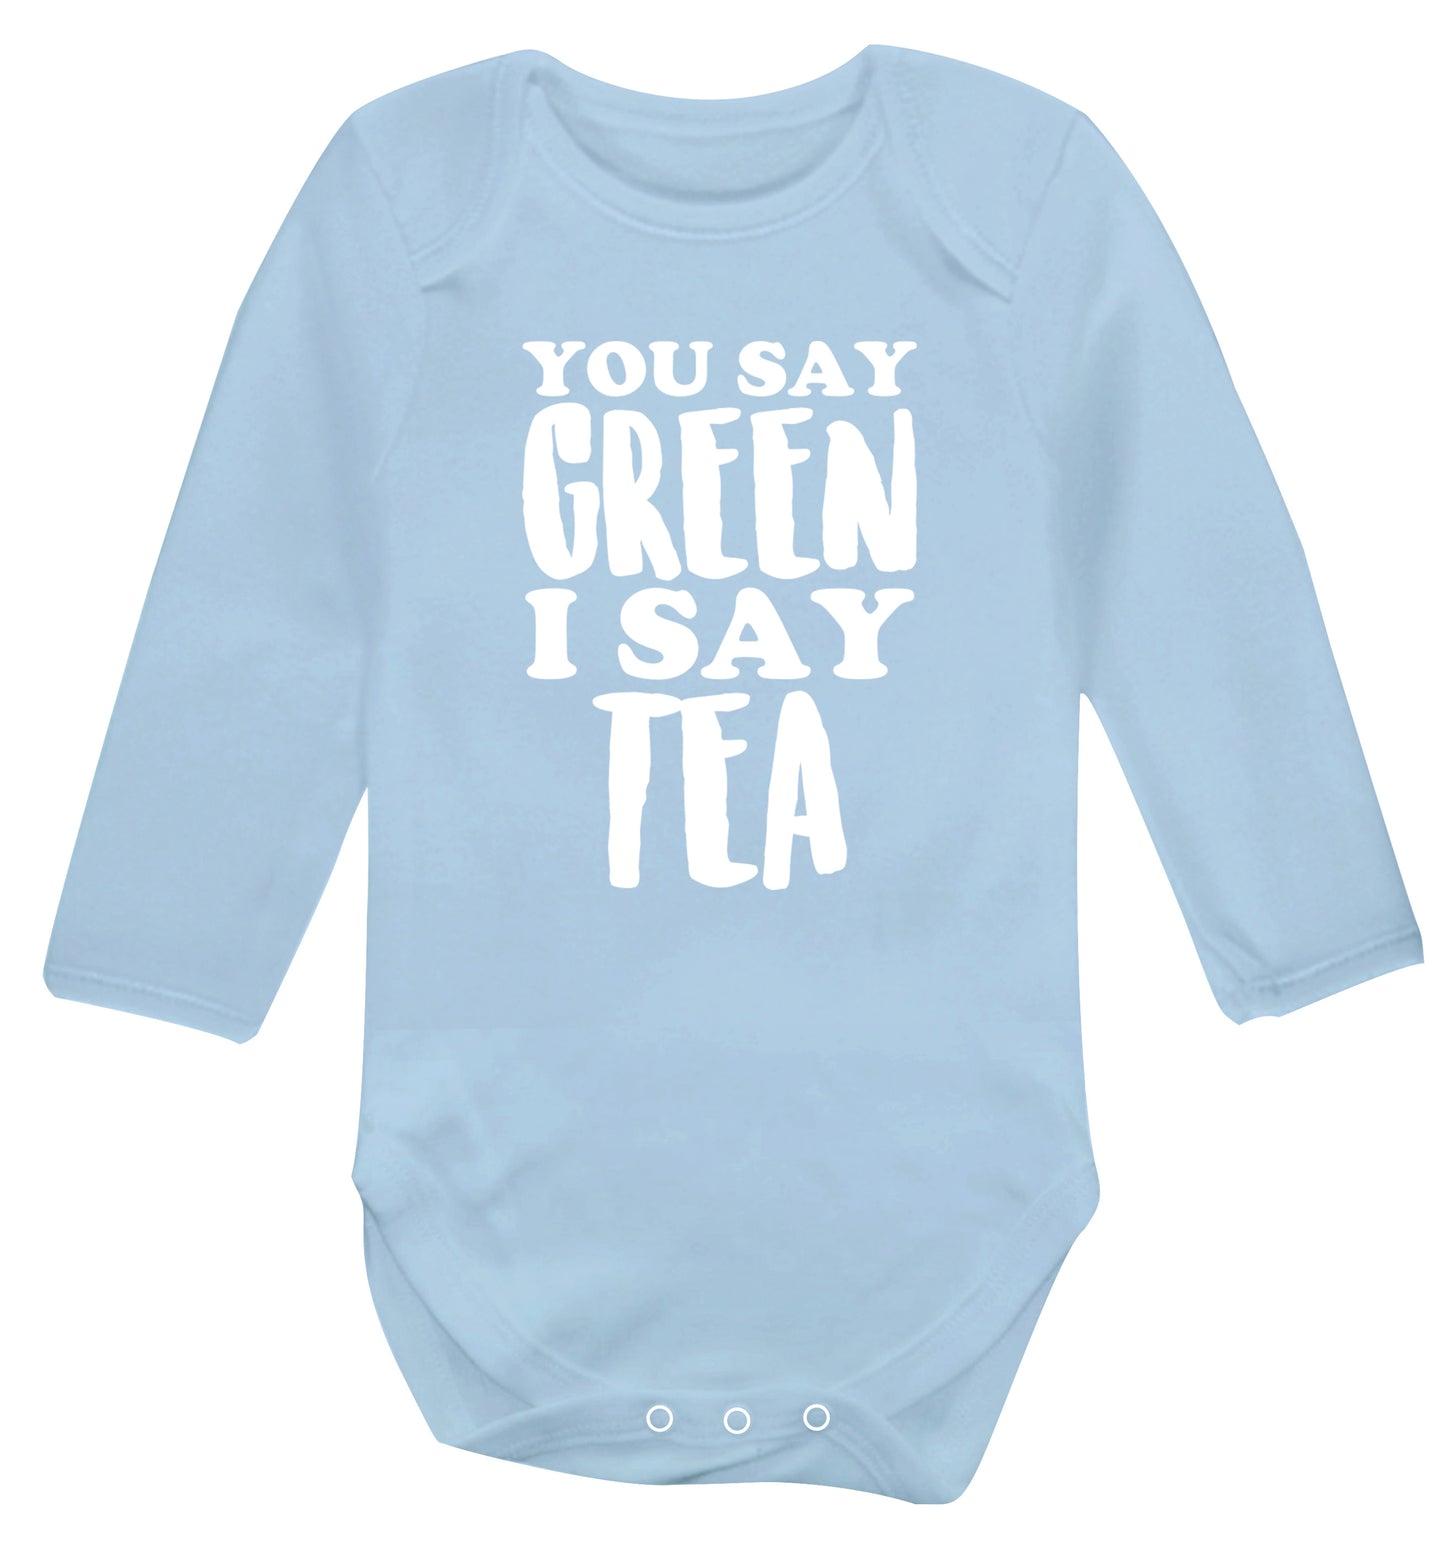 You say green I say tea! Baby Vest long sleeved pale blue 6-12 months